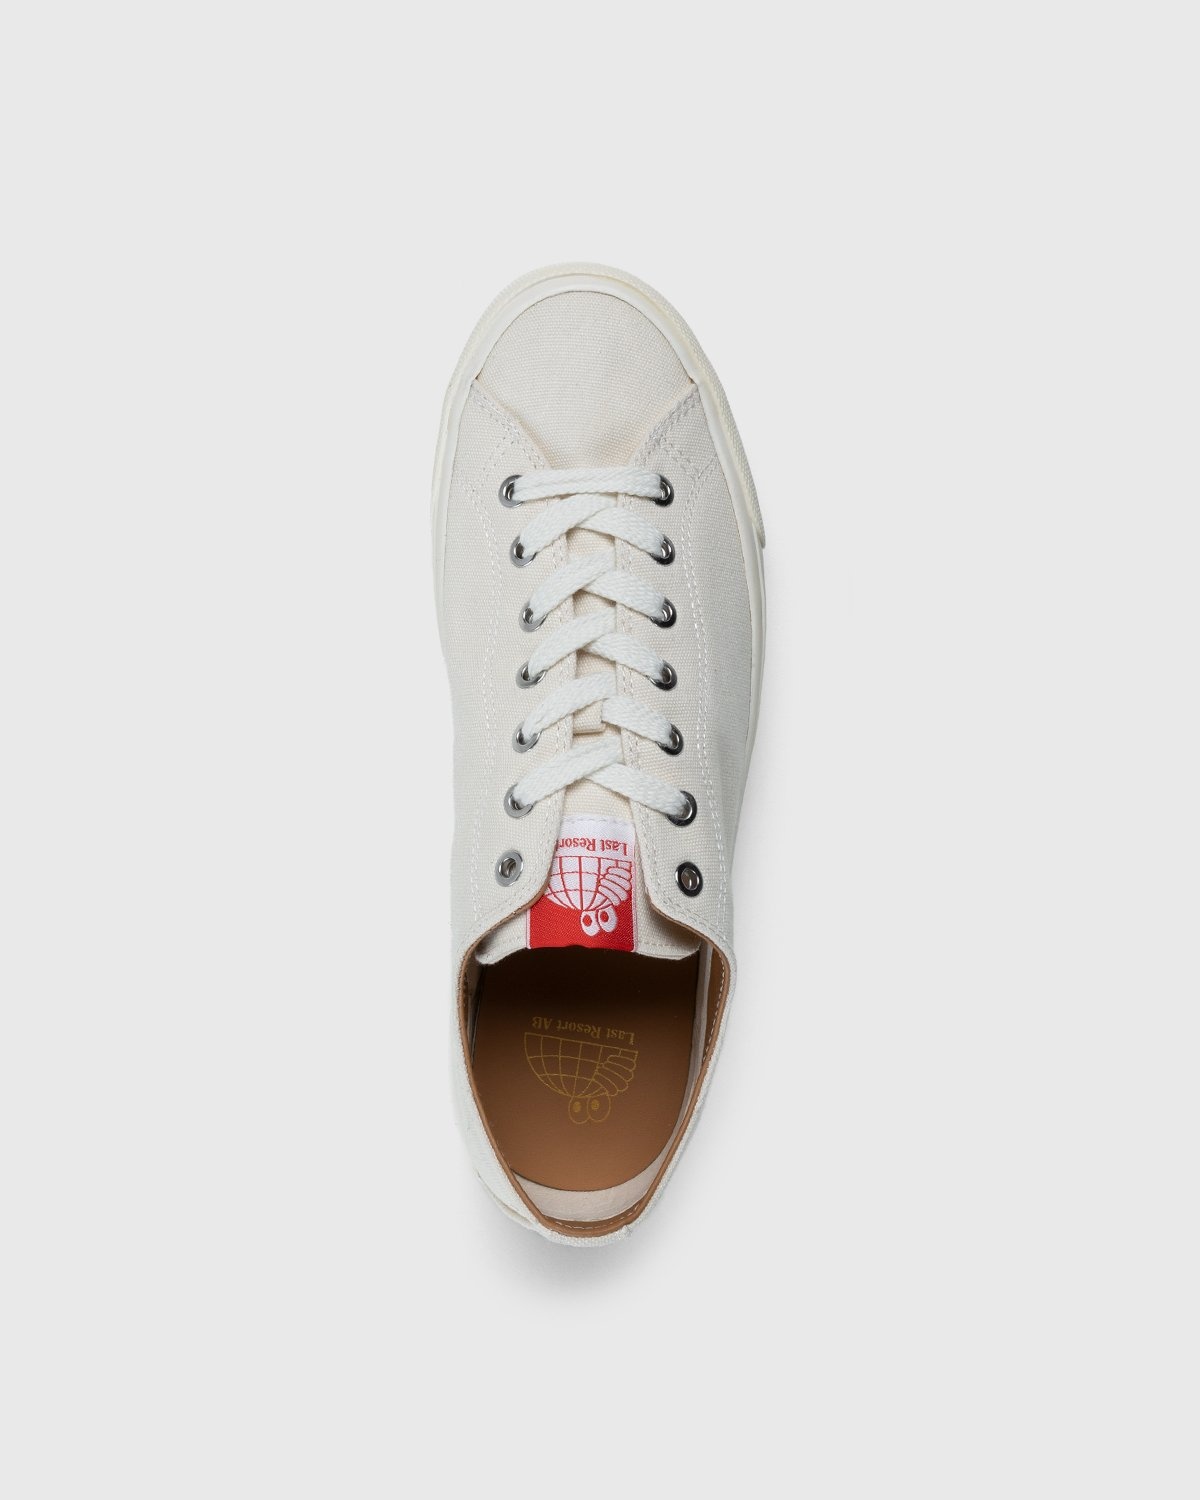 Last Resort AB – VM003 Canvas Lo White/White - Low Top Sneakers - White - Image 5